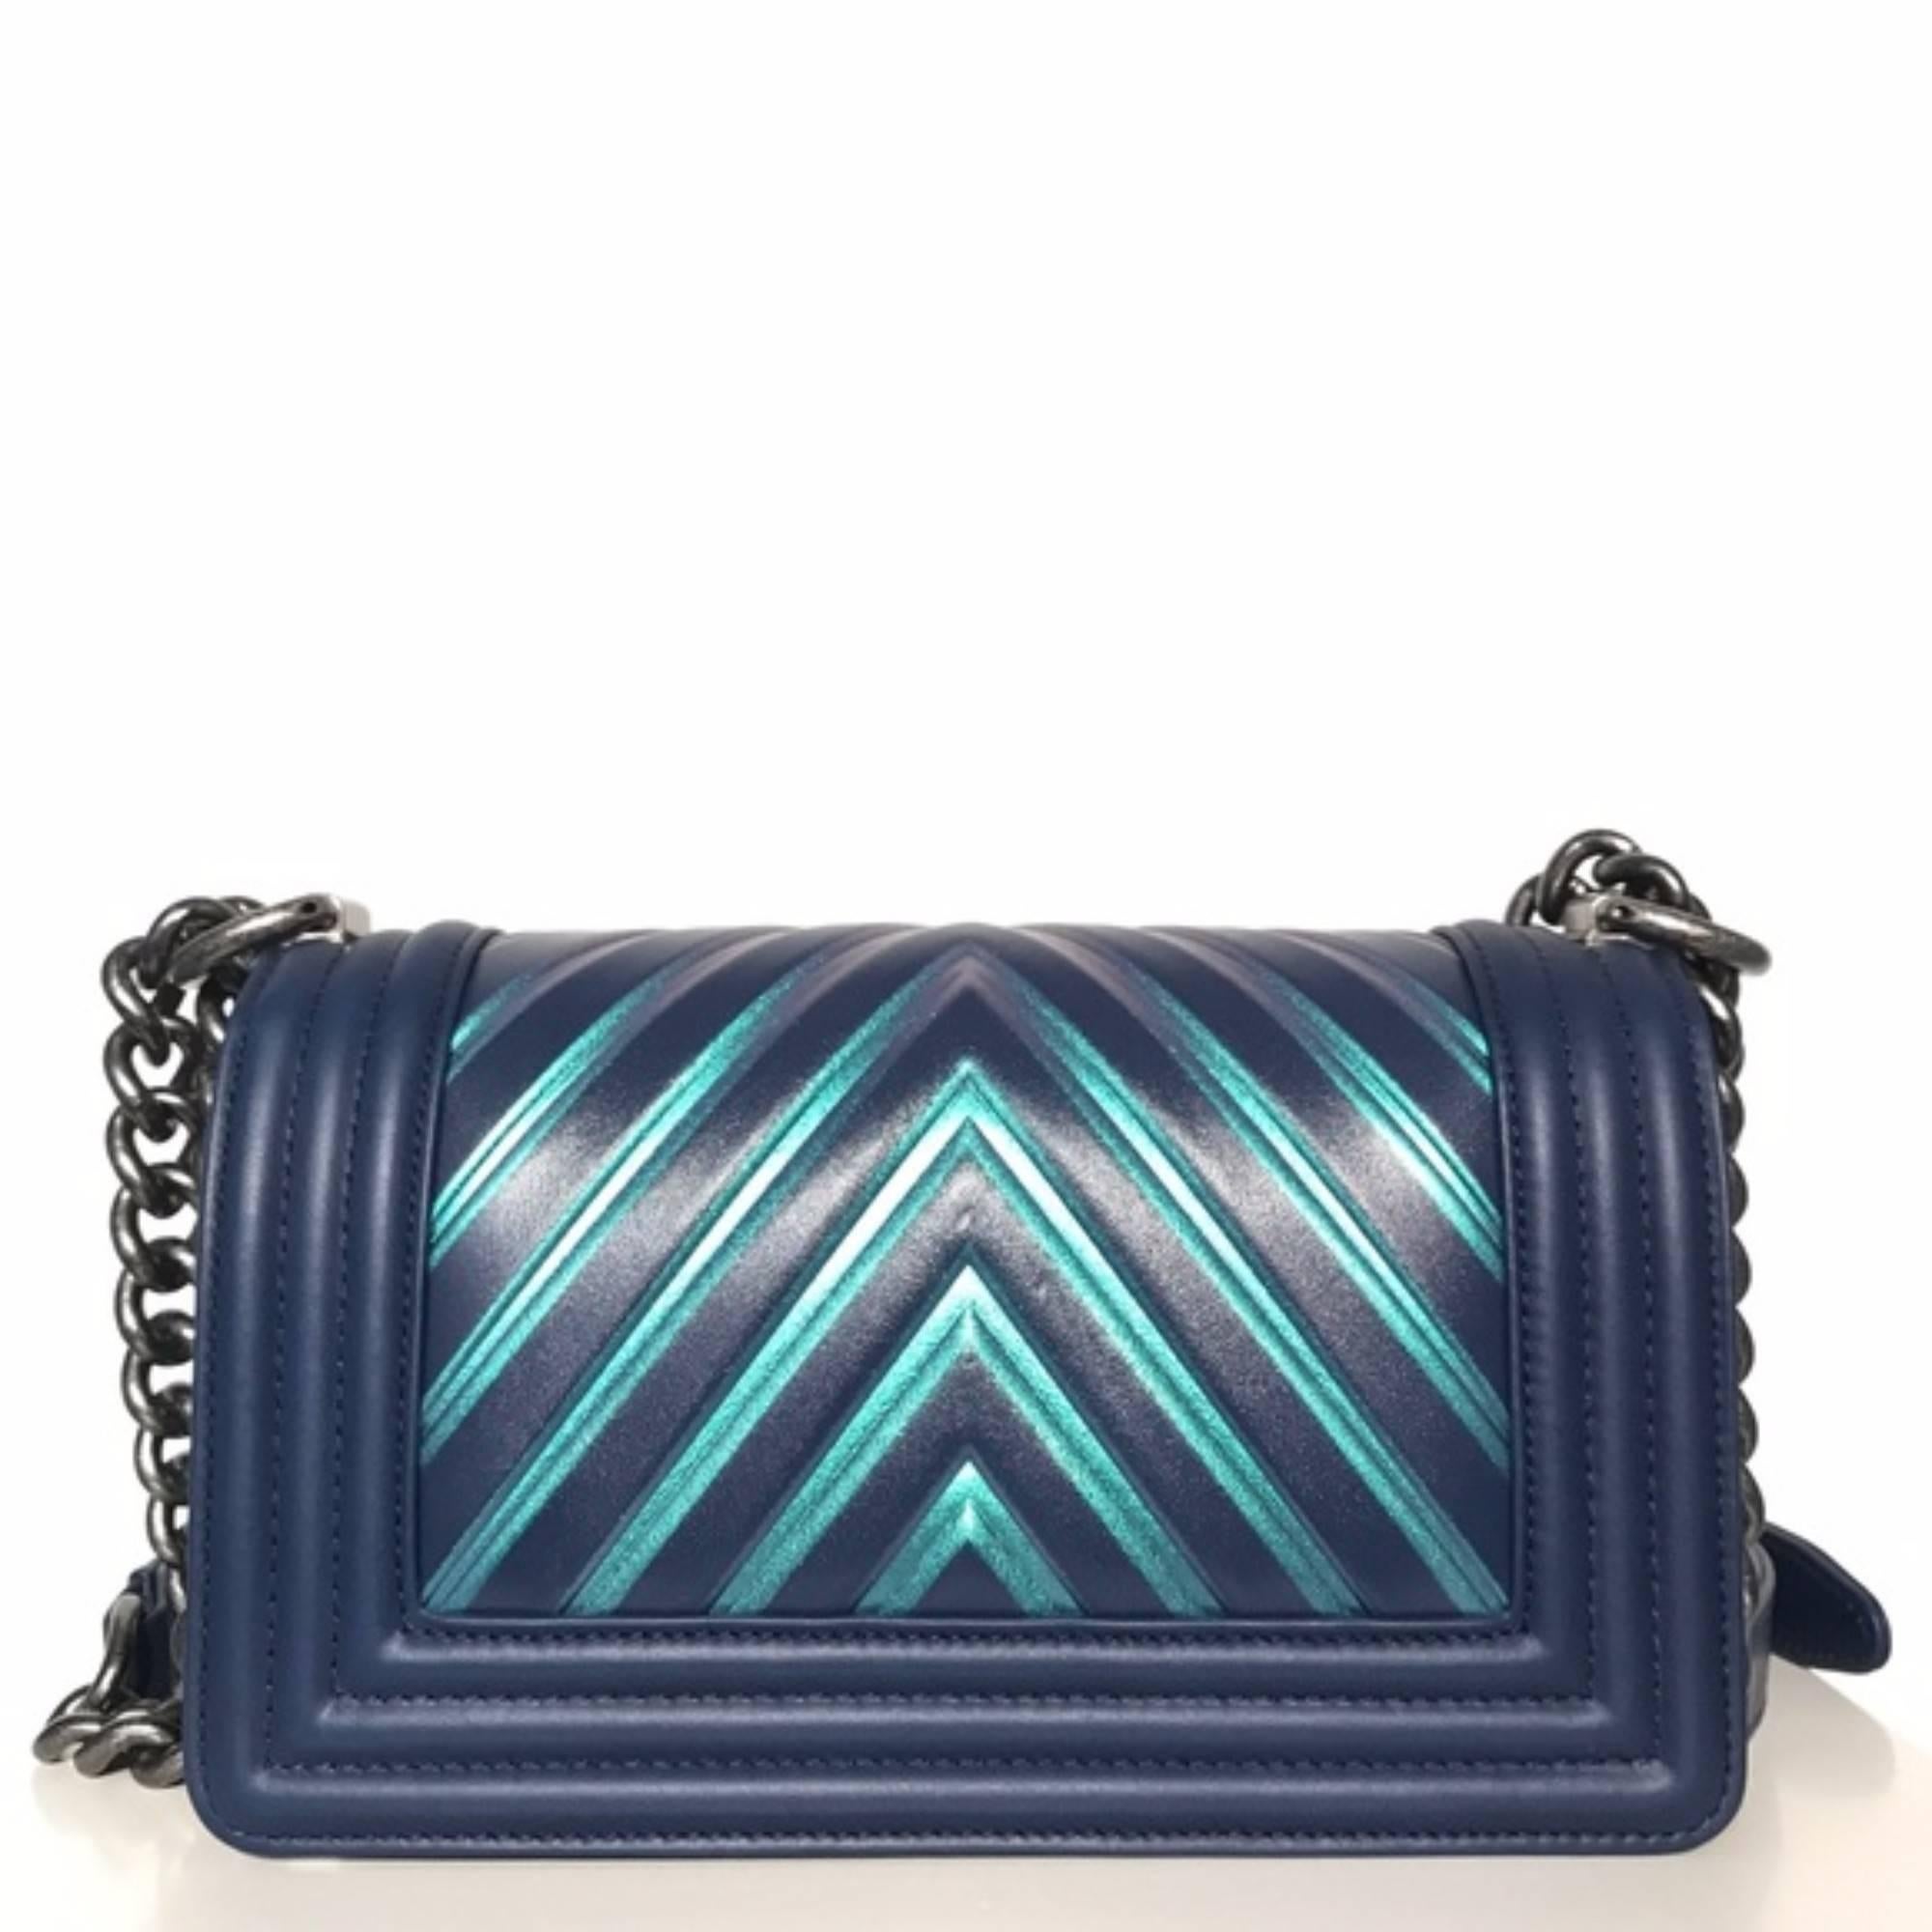 Chanel Painted Chevron Iridescent Small Bag (Blue, Size - Small)
Brand new.
24 series. Limited edition.
Box and dustbag included.
Made in Italy.